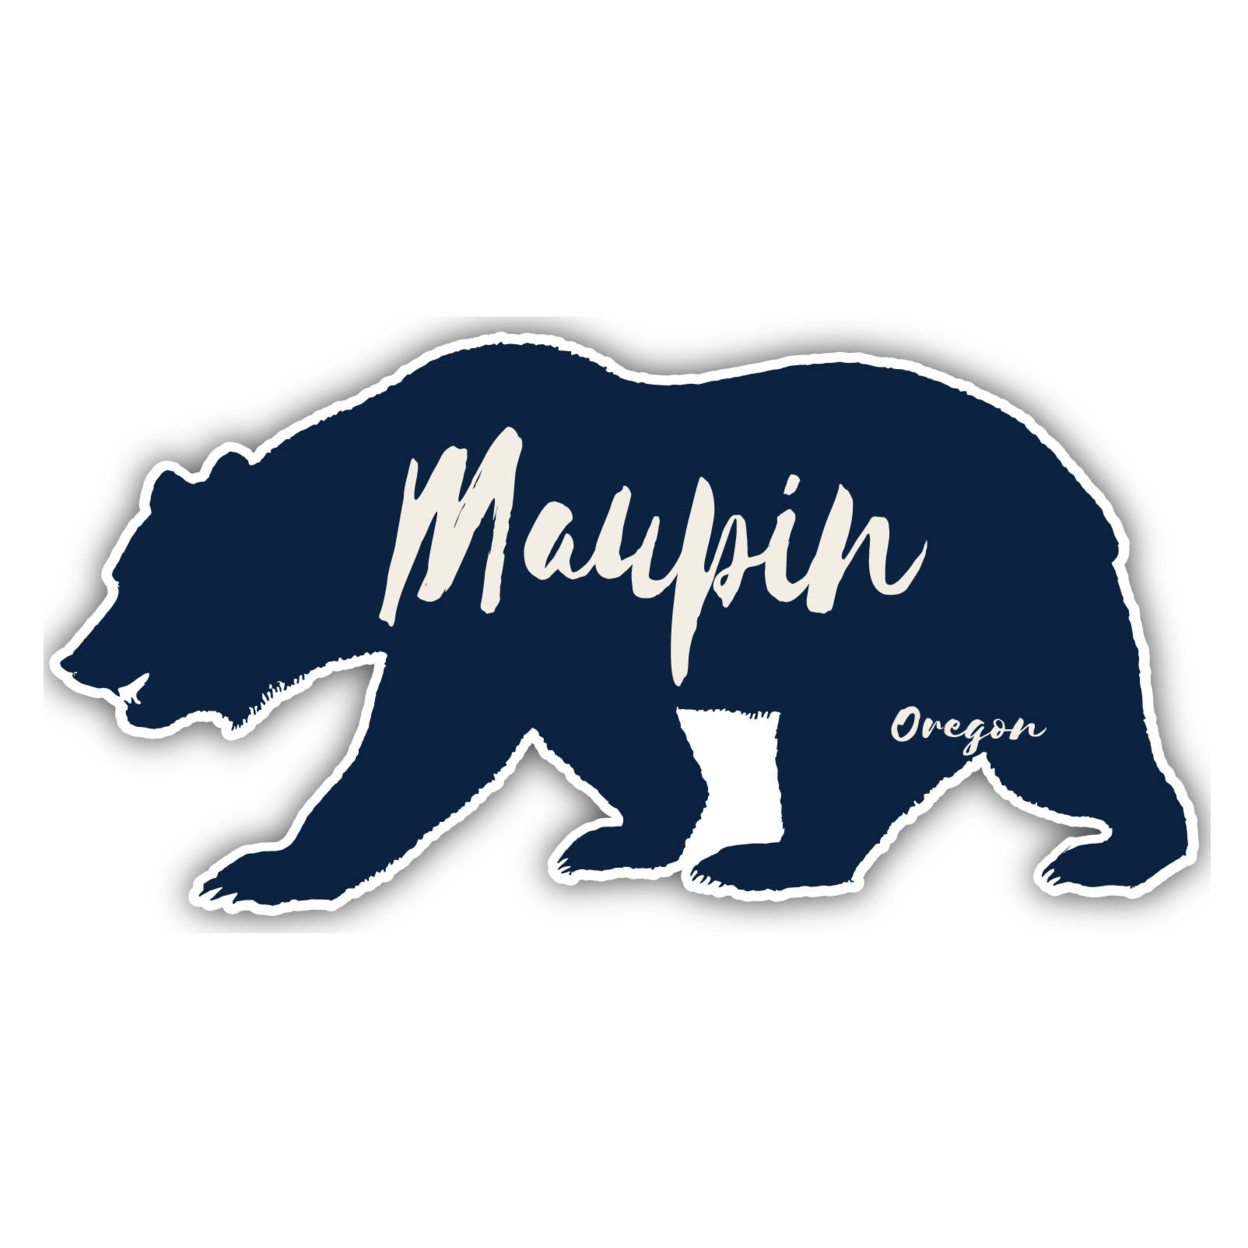 Maupin Oregon Souvenir Decorative Stickers (Choose Theme And Size) - 2-Inch, Great Outdoors